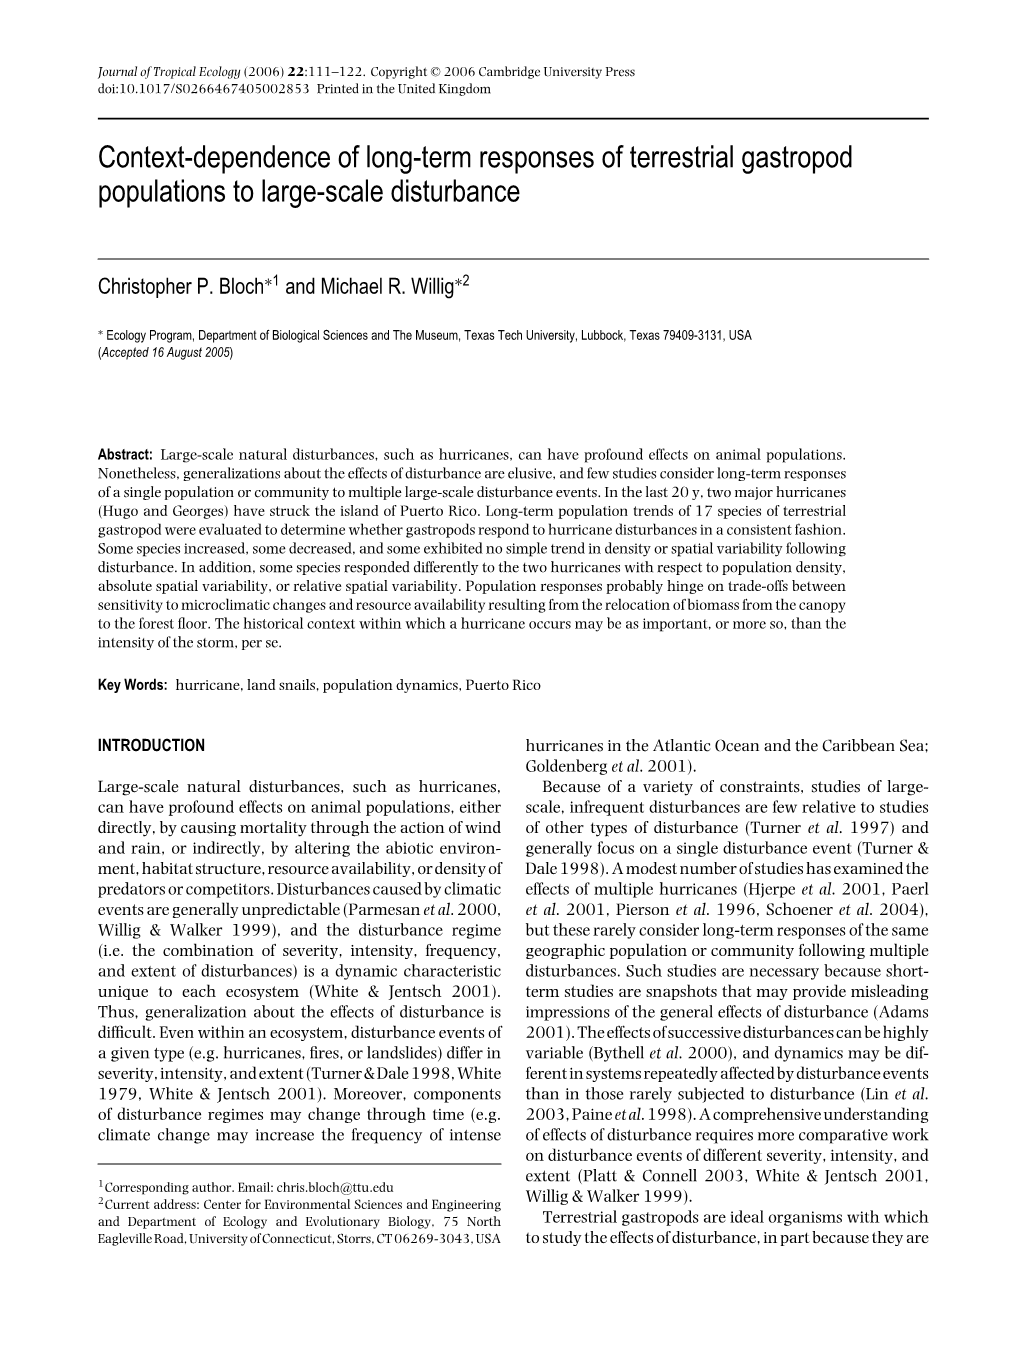 Context-Dependence of Long-Term Responses of Terrestrial Gastropod Populations to Large-Scale Disturbance